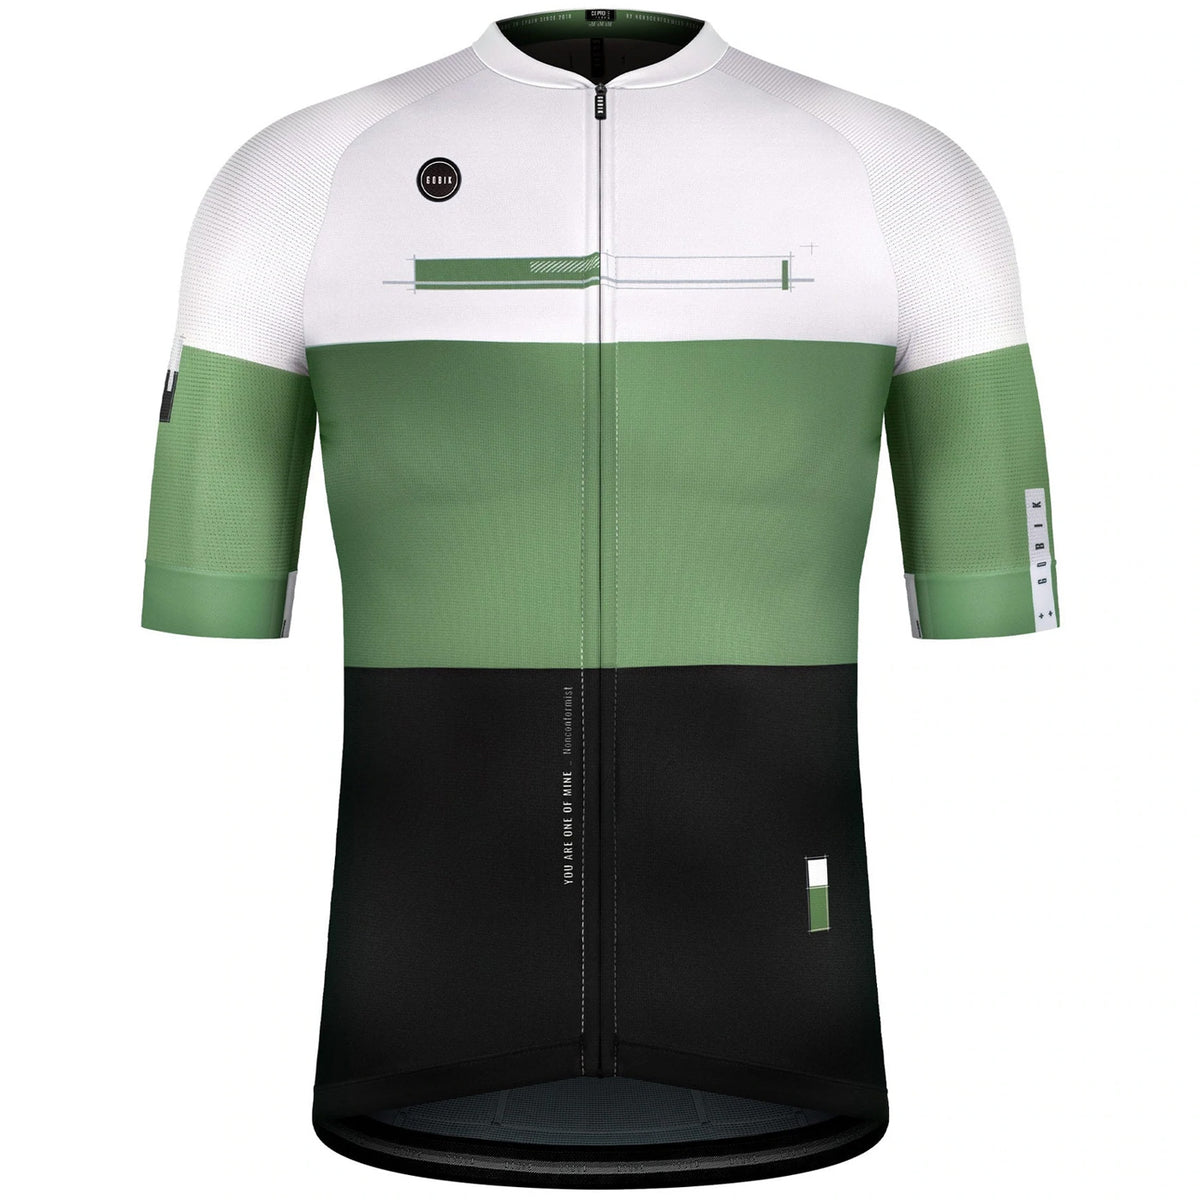 Maillot Cx Pro Fern - Blanco verde | All4cycling